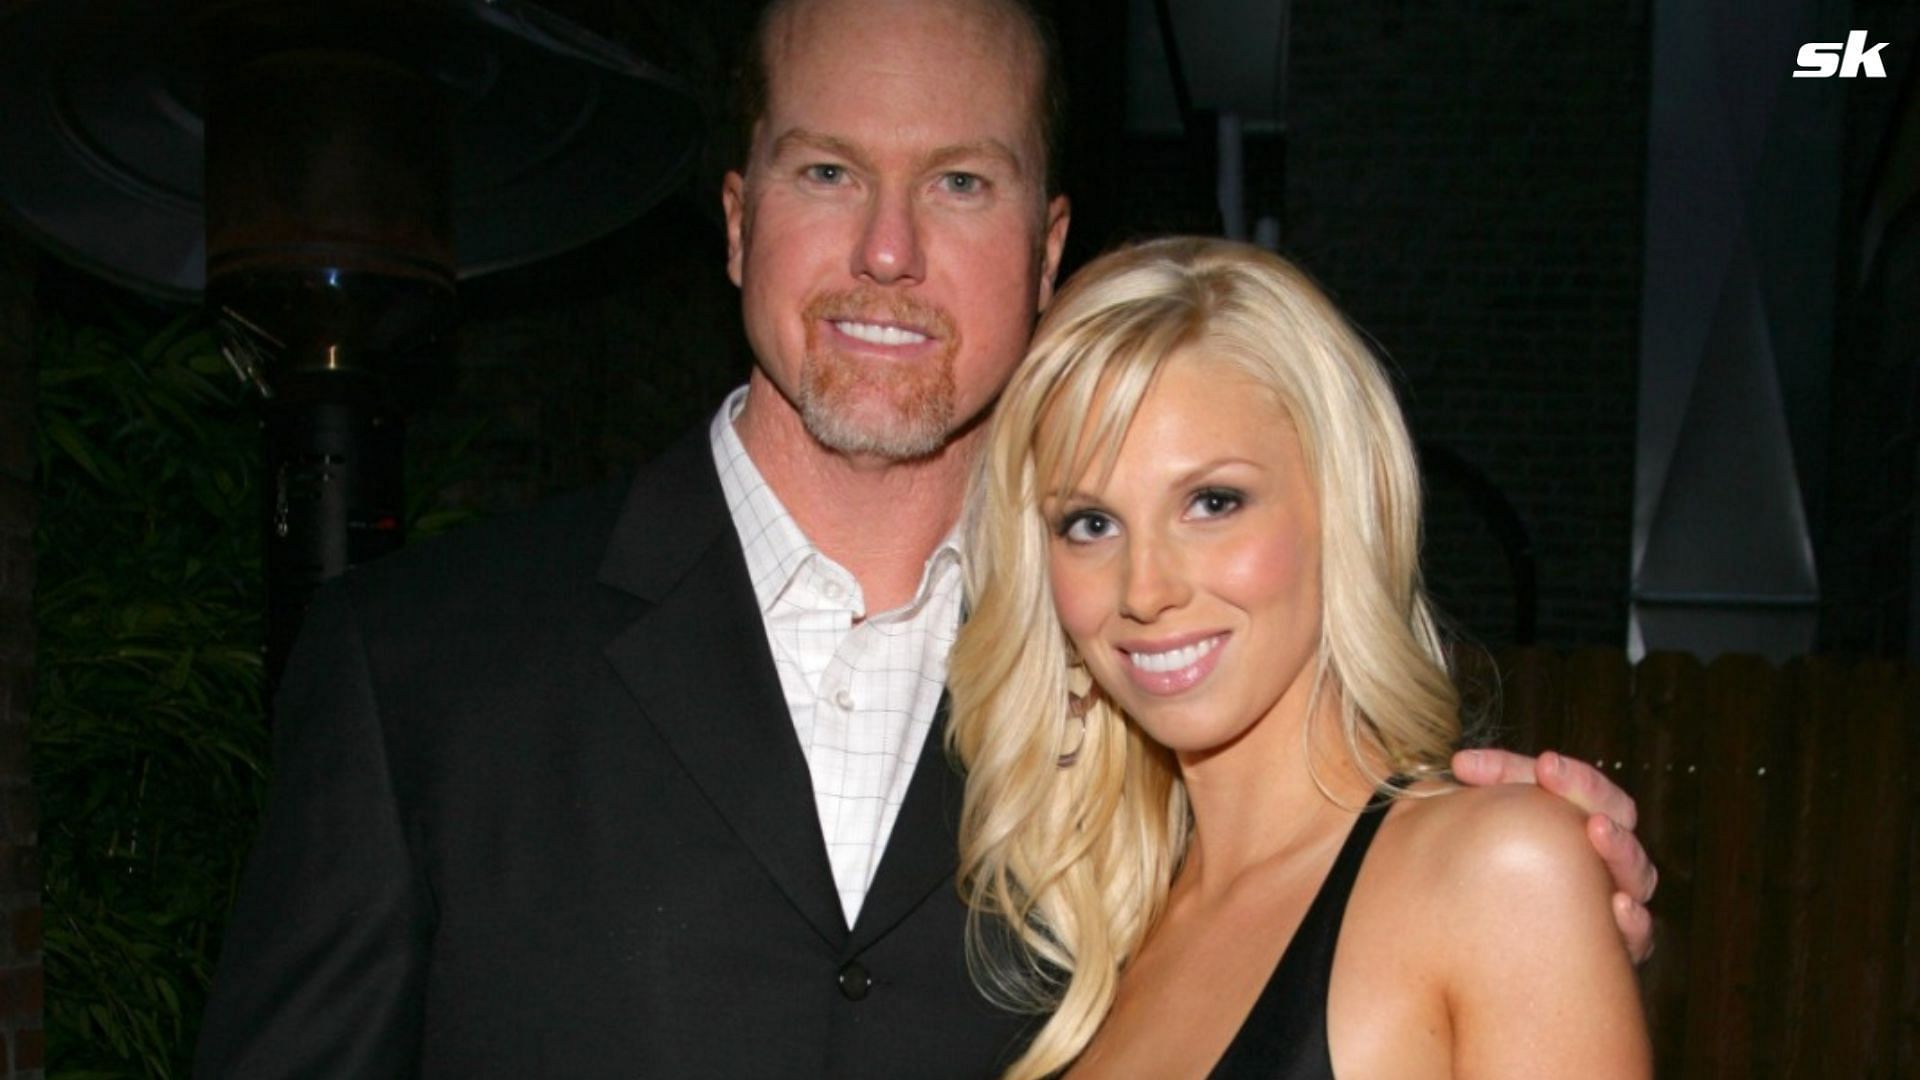 When former Oakland Athletics star Mark McGwire's in-laws were